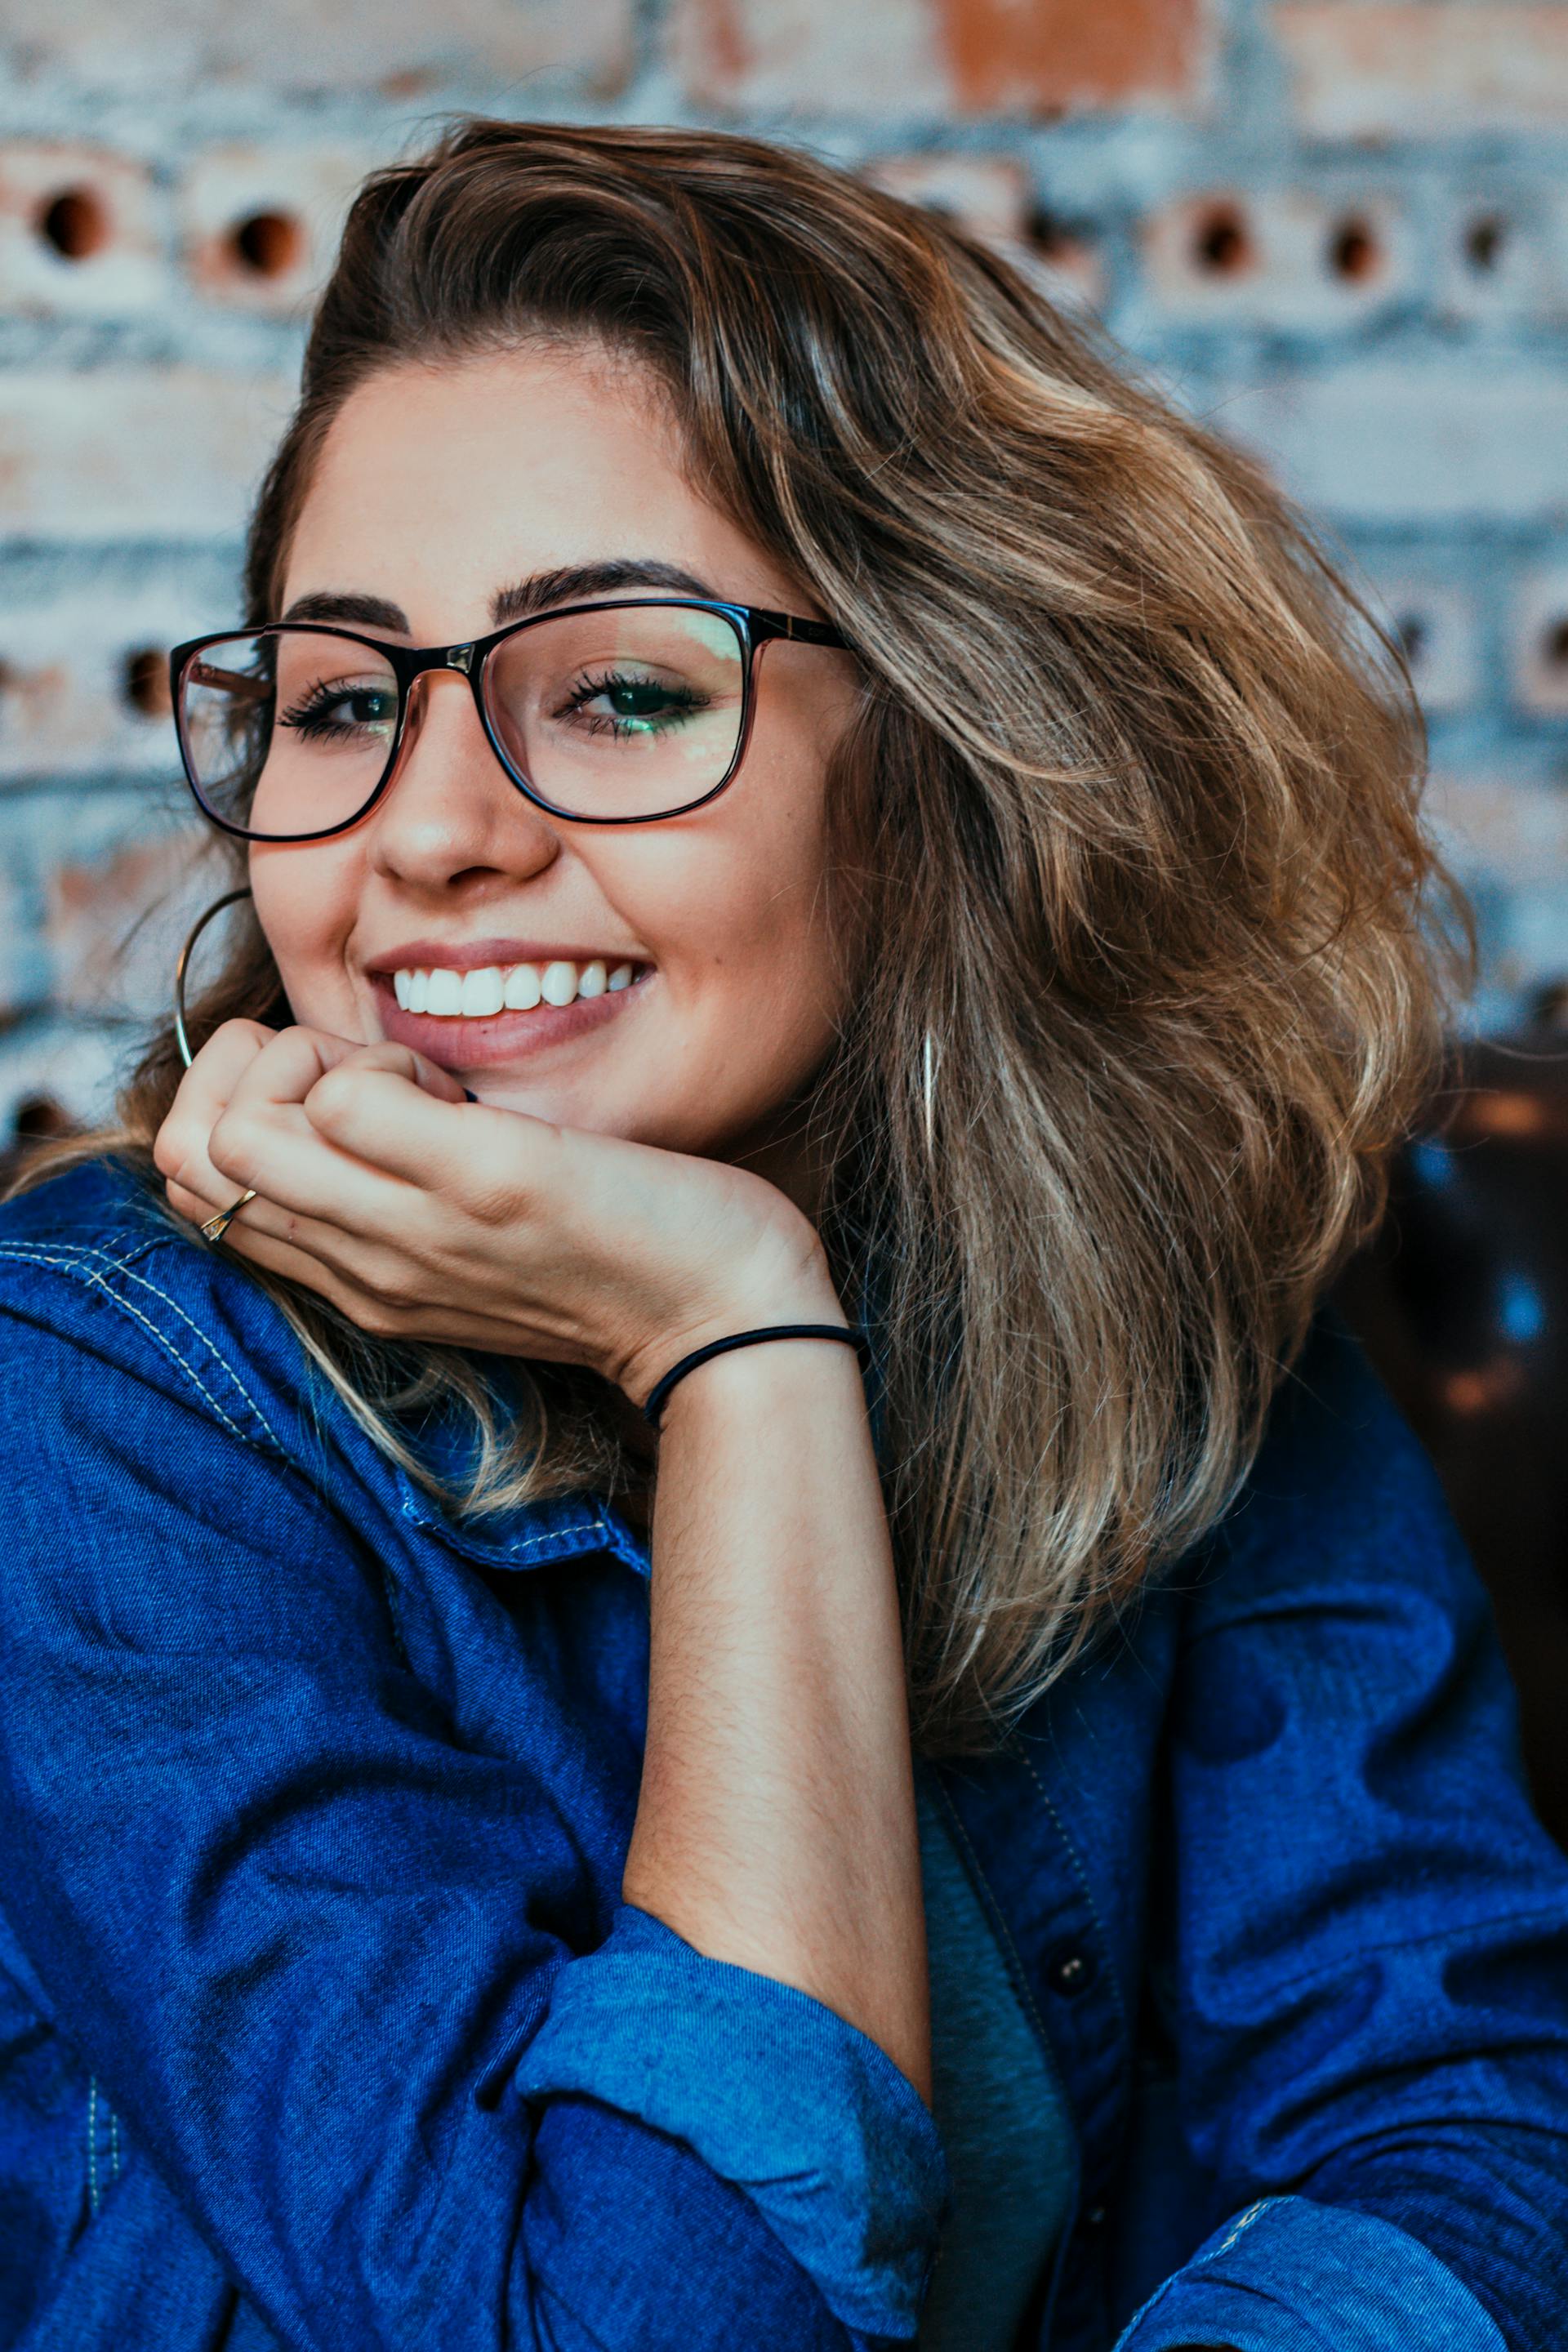 A smiling woman wearing blue | Source: Pexels